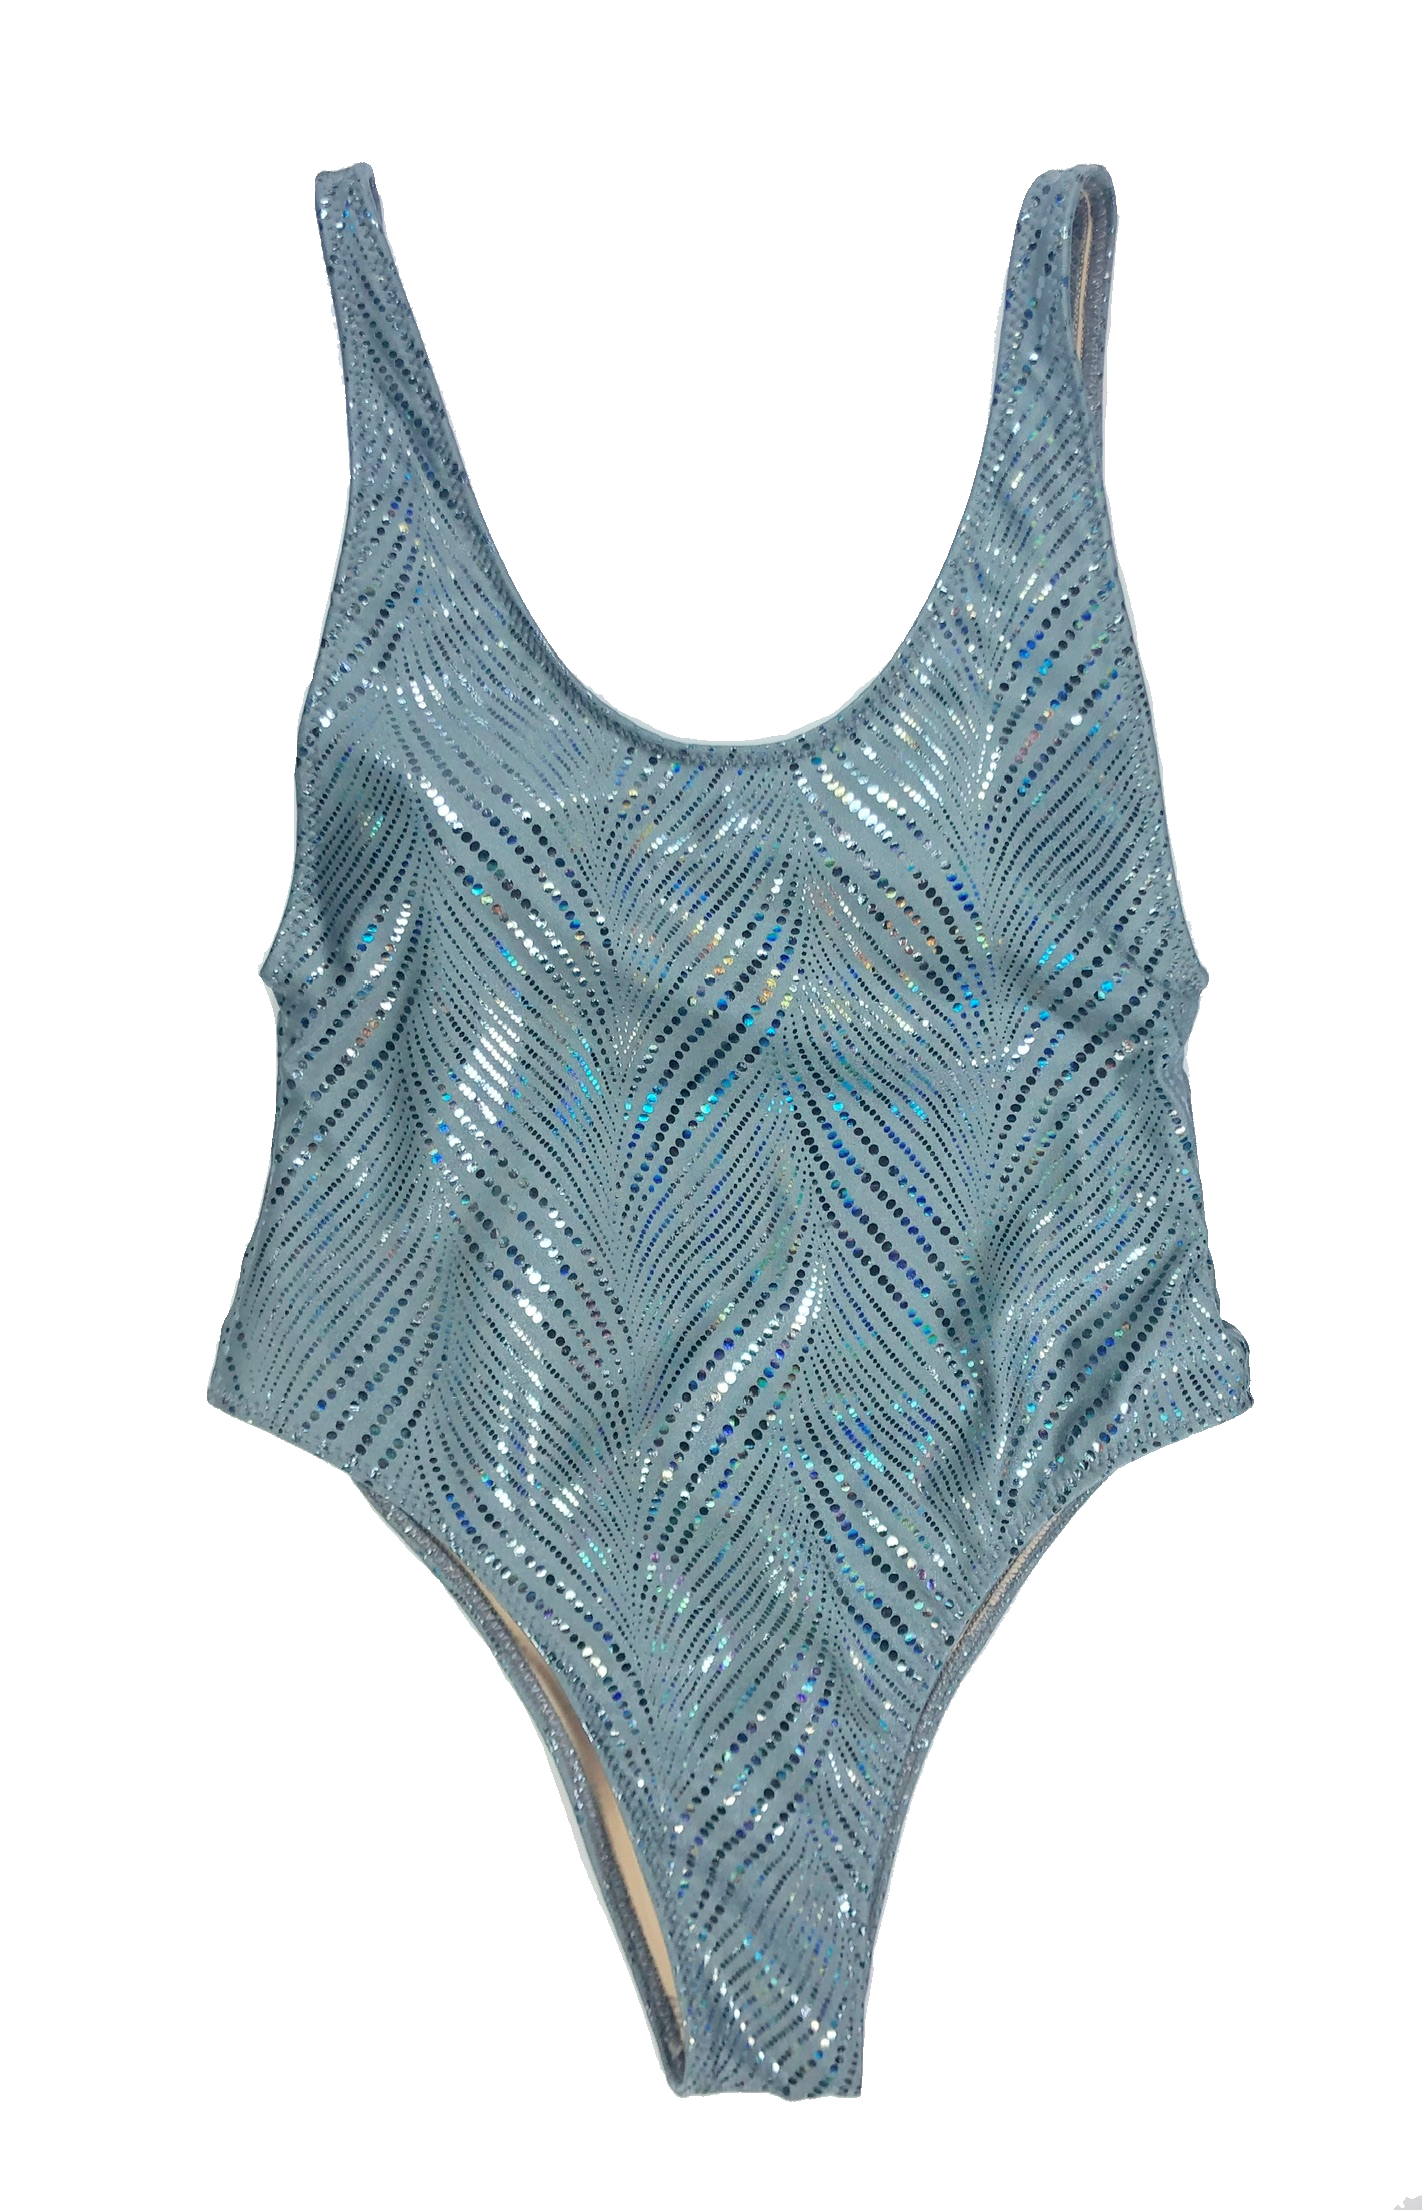 wendolin-designs - Wendolin Designs - Swimsuit - A One Piece Swimsuit High Cut - Color Gray Sparkling